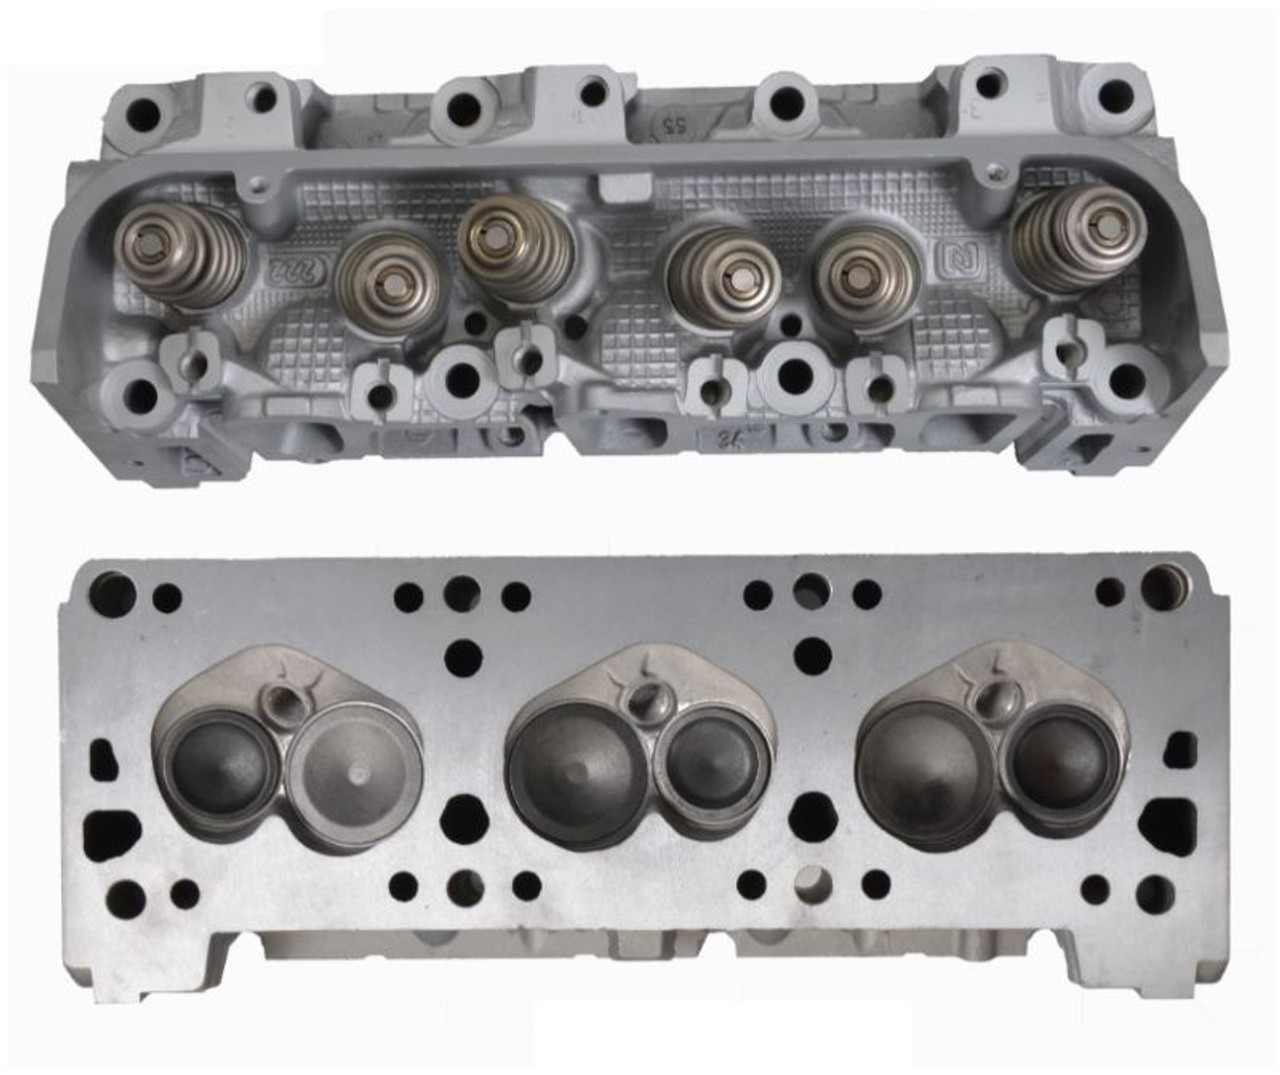 Cylinder Head Assembly - 2001 Chevrolet Monte Carlo 3.4L (CH1051R.D31)